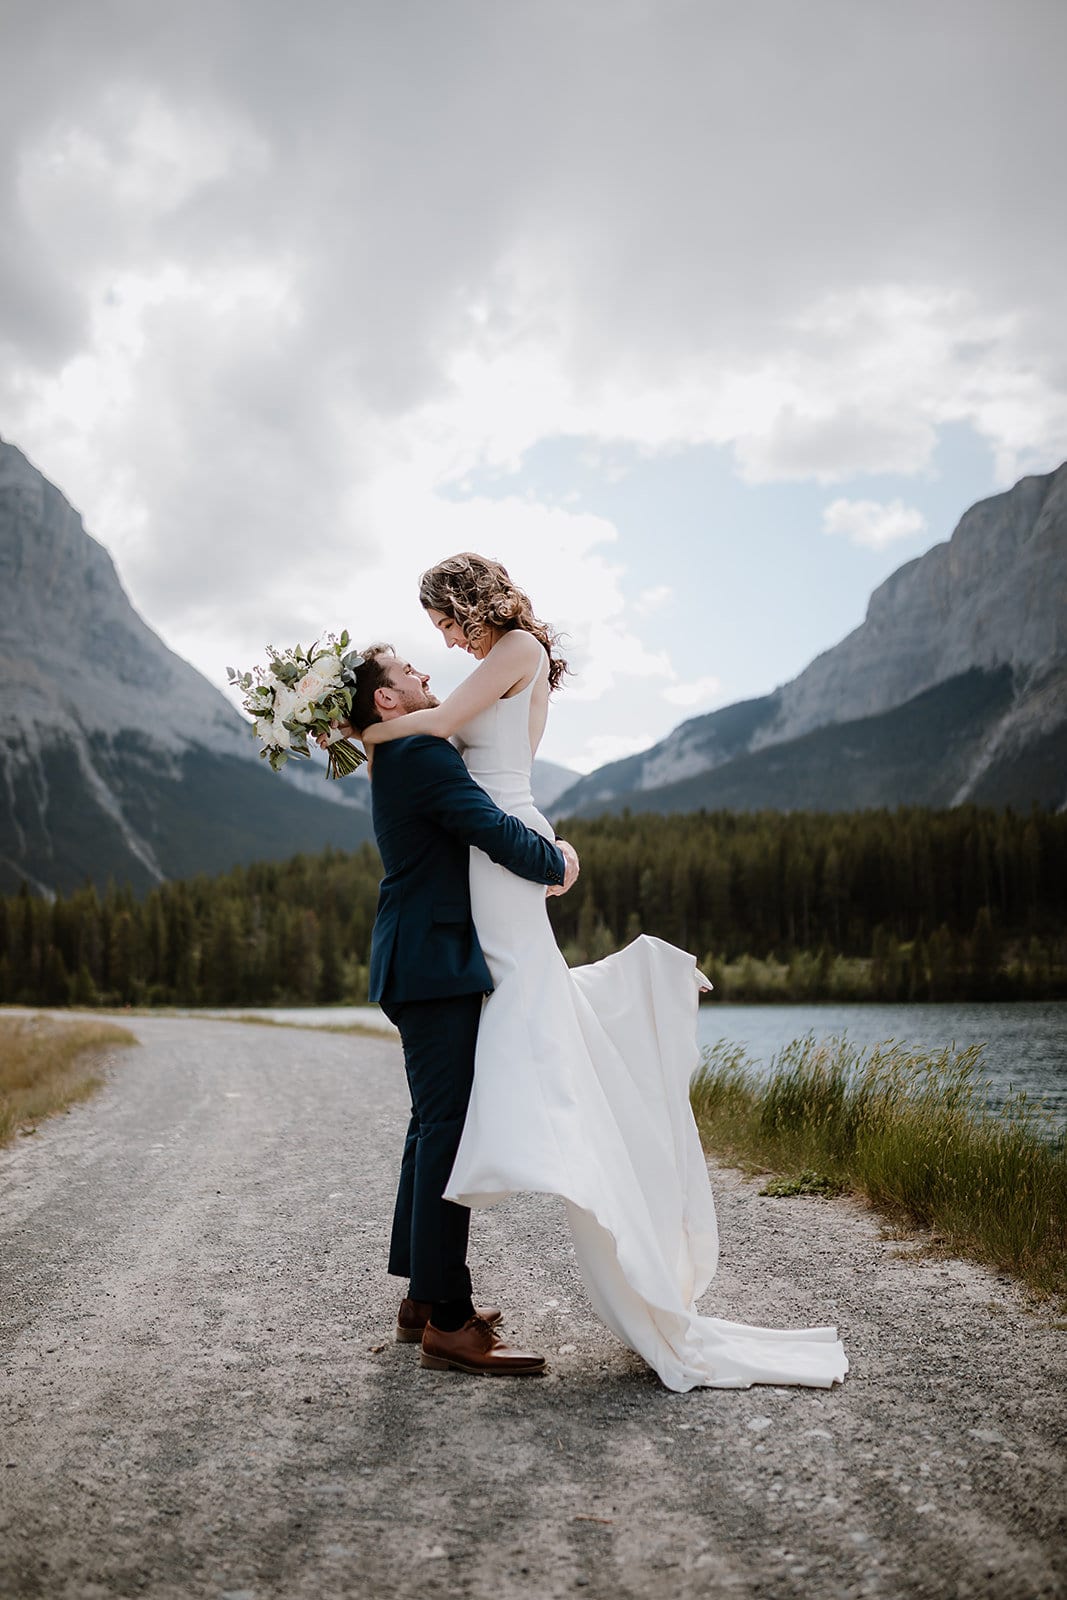 OUTDOOR WEDDING PHOTOS AT RUNDLEVIEW PARKETTE IN CANMORE, AB